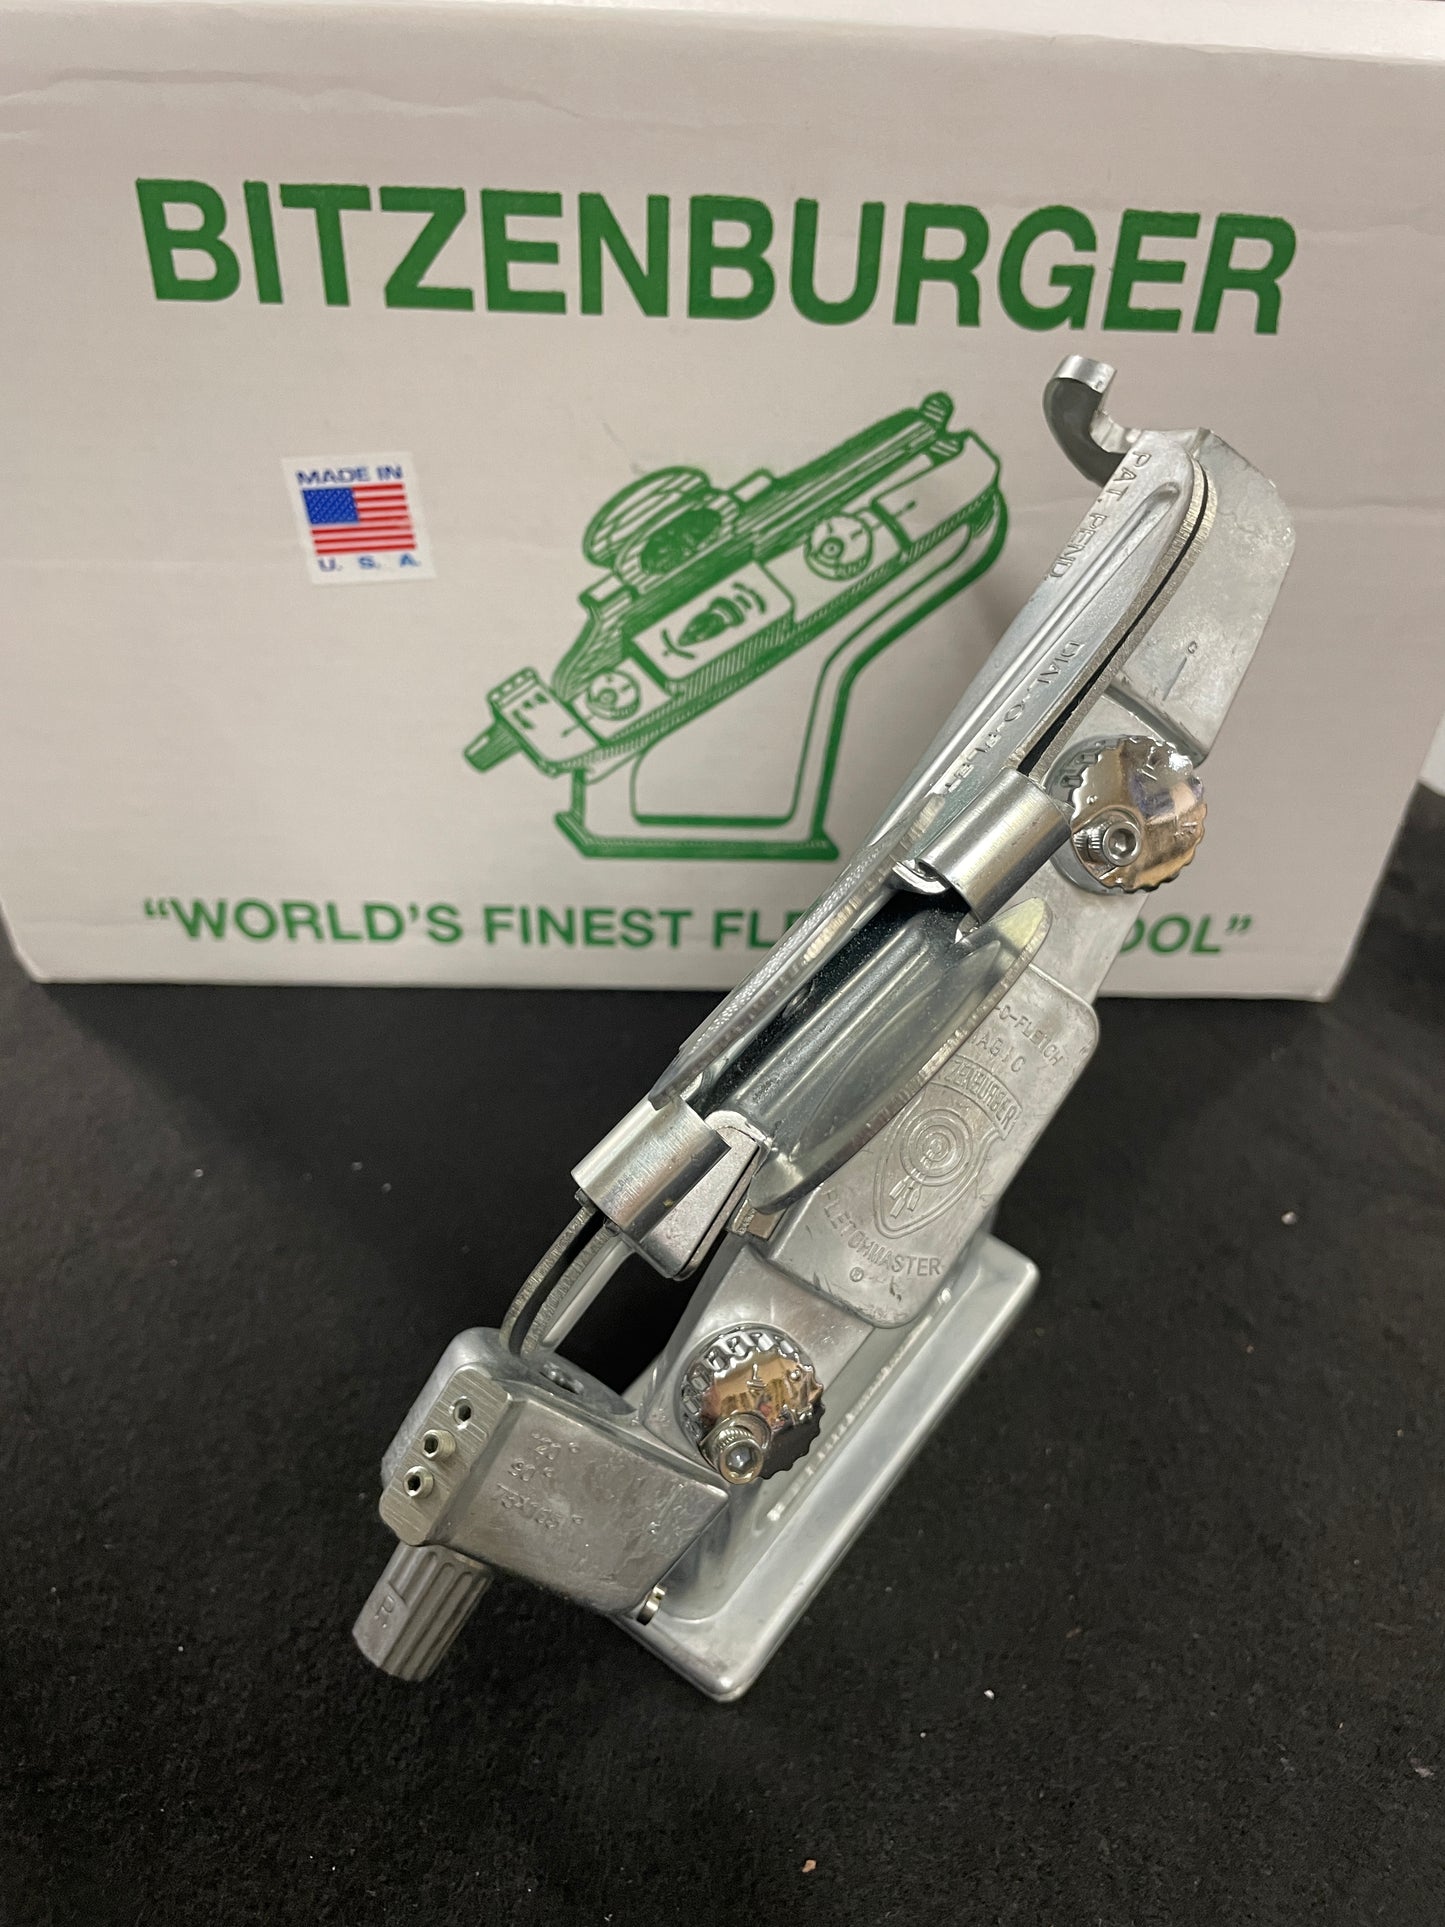 Bitzenburger Right Helical Jig and Clamp